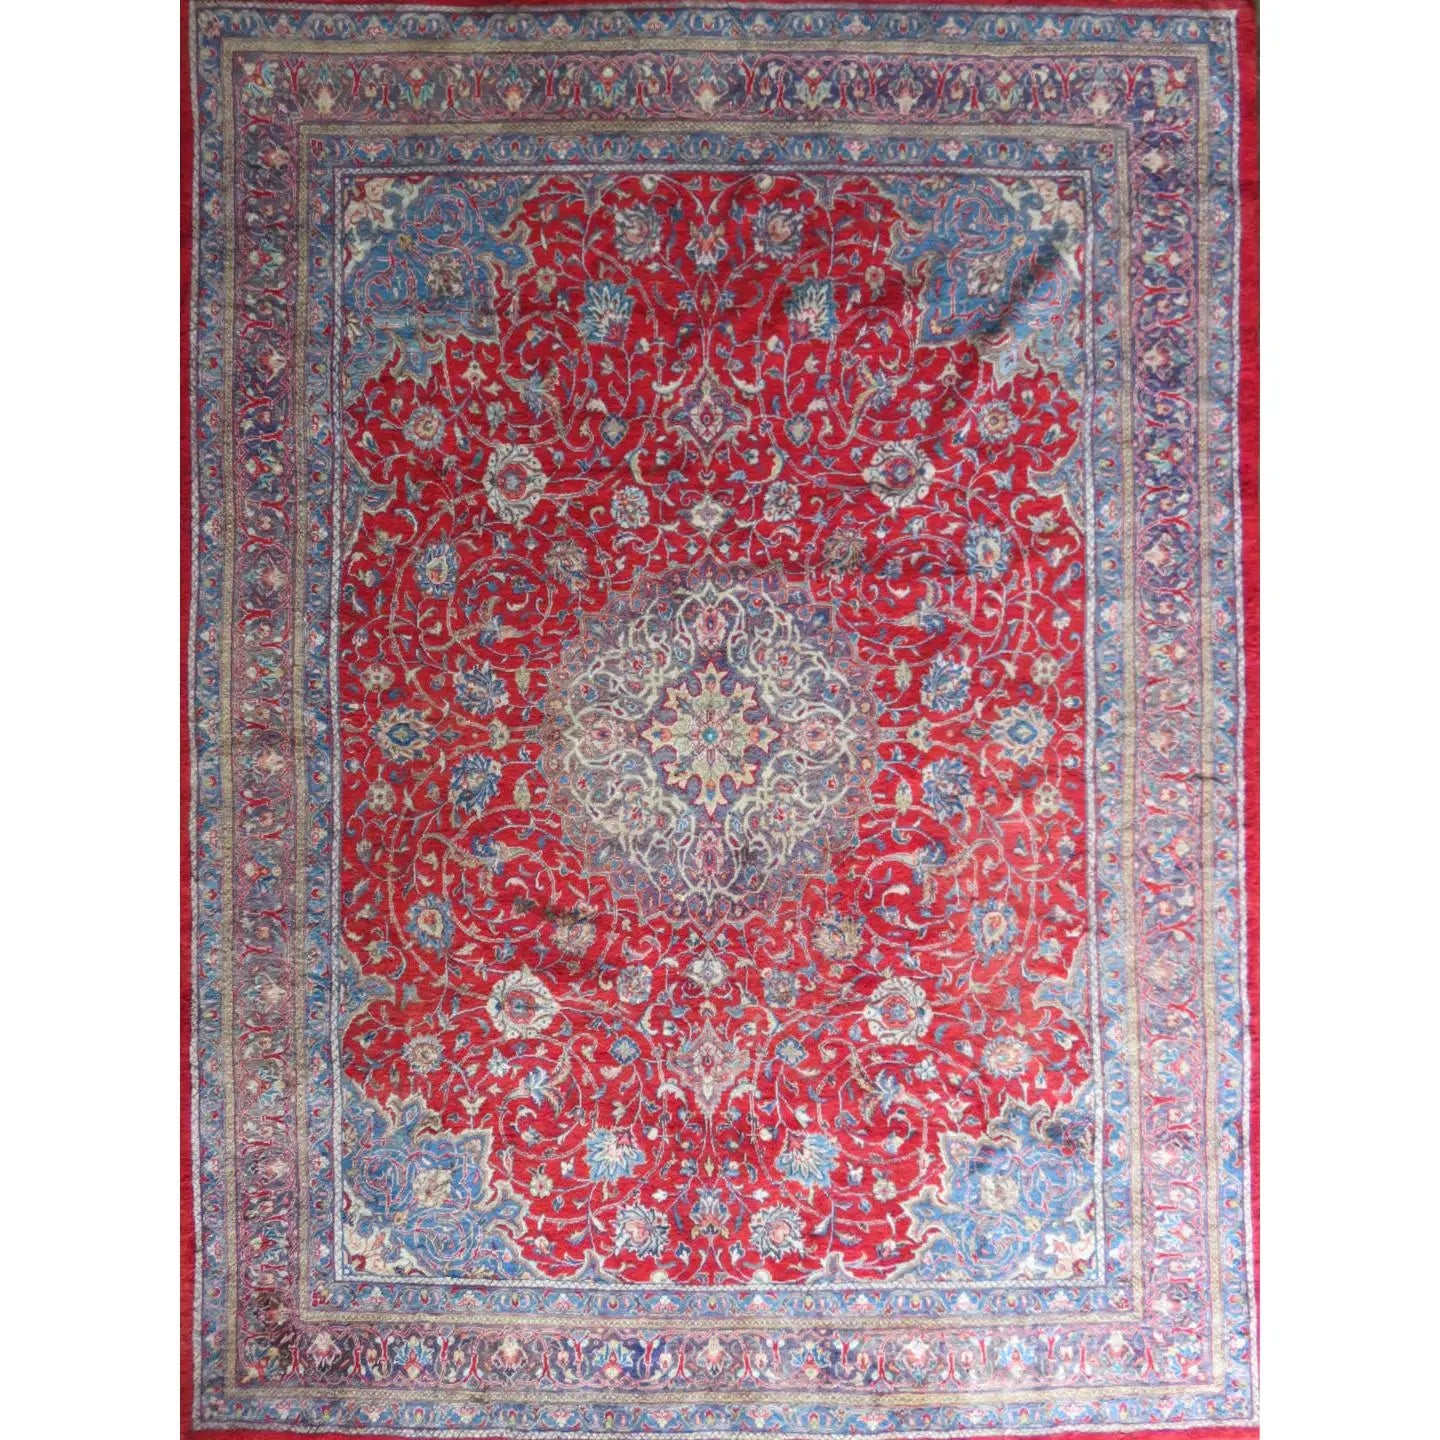 Hand-Knotted Persian Wool Rug _ Luxurious Vintage Design, 13'1" x 9'8", Artisan Crafted